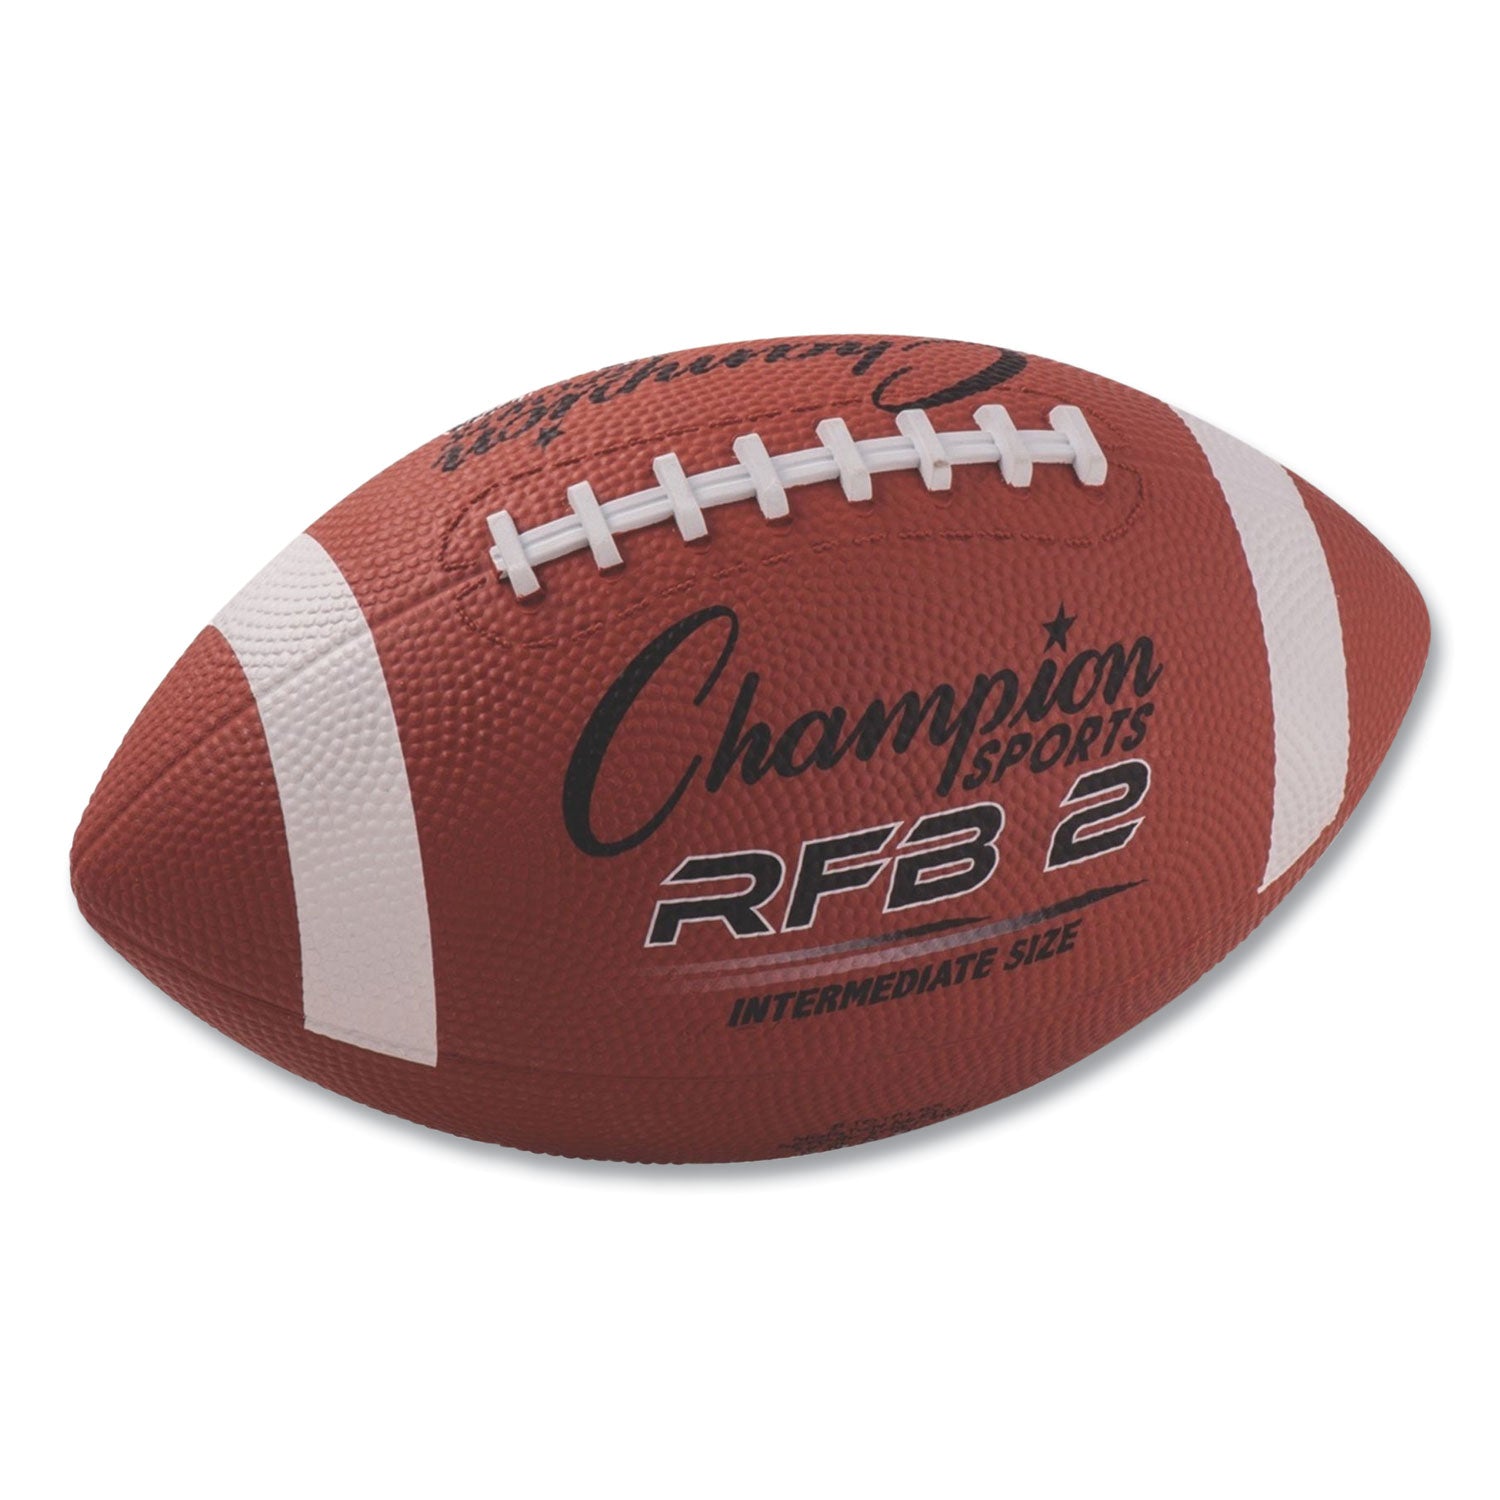 Rubber Sports Ball, For Football, Intermediate Size, Brown - 